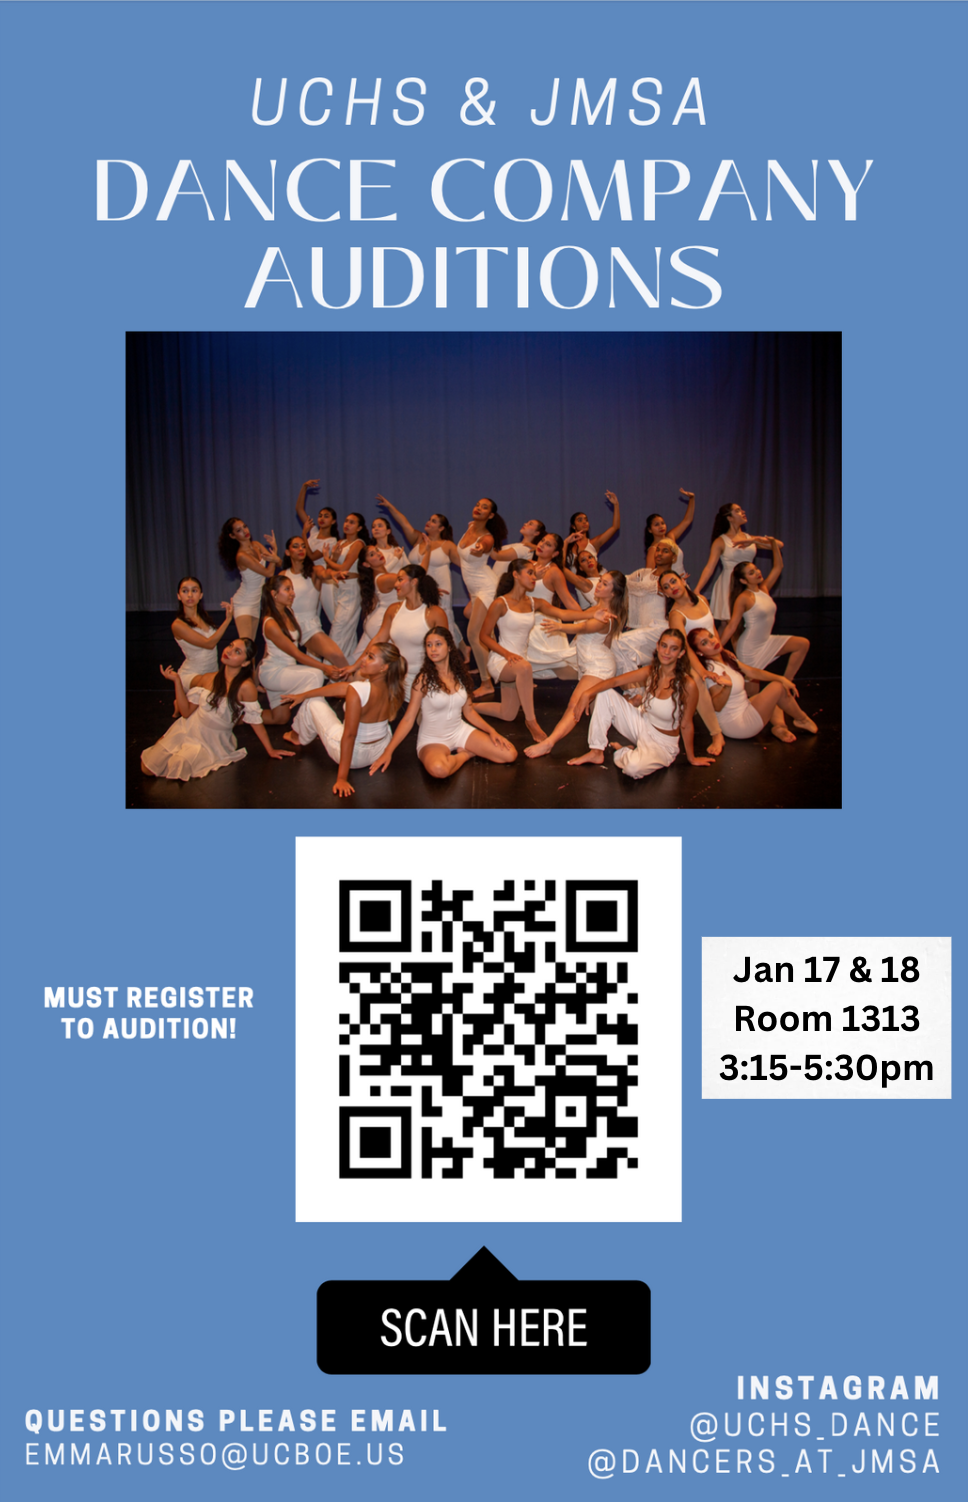 The UCHS and JMSA Dance Company Auditions Flyer